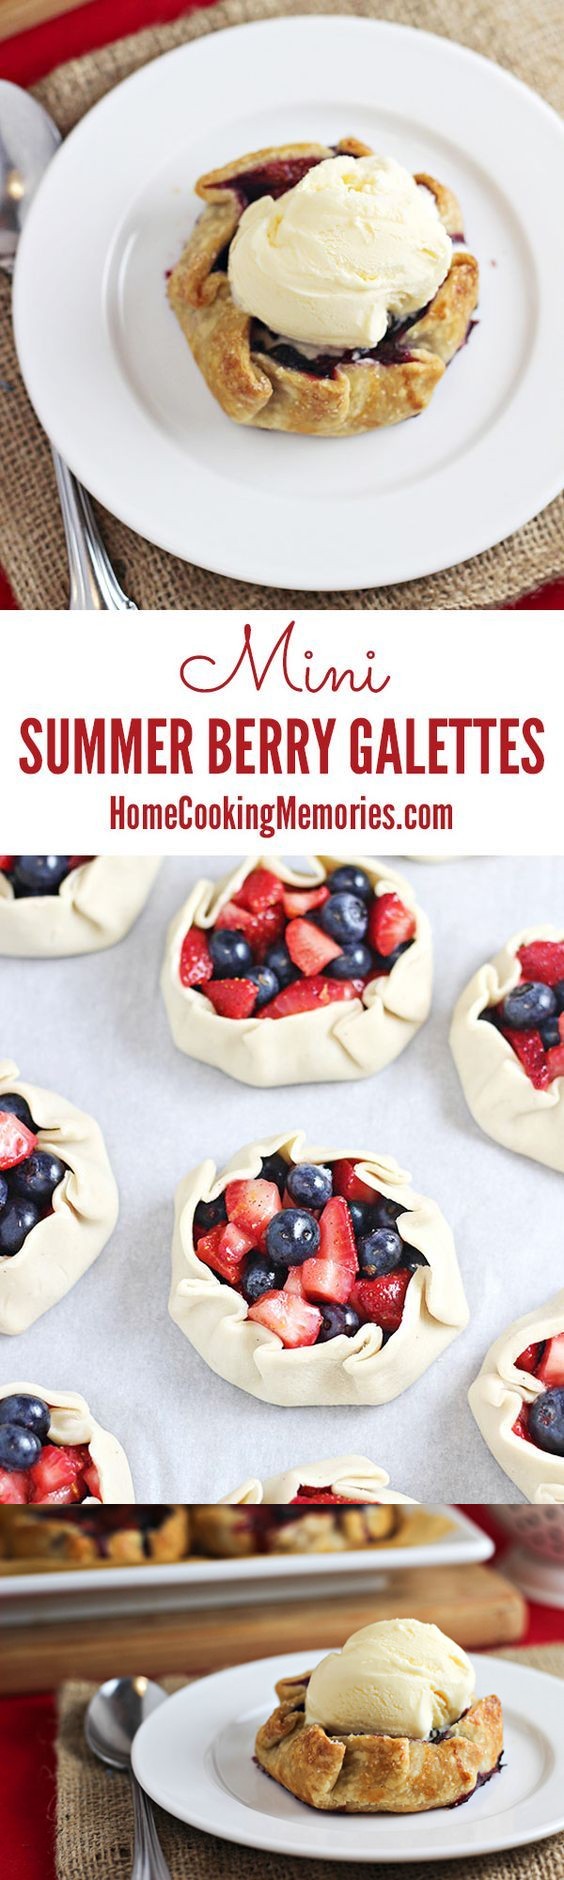 Mini Summer Berry Galettes